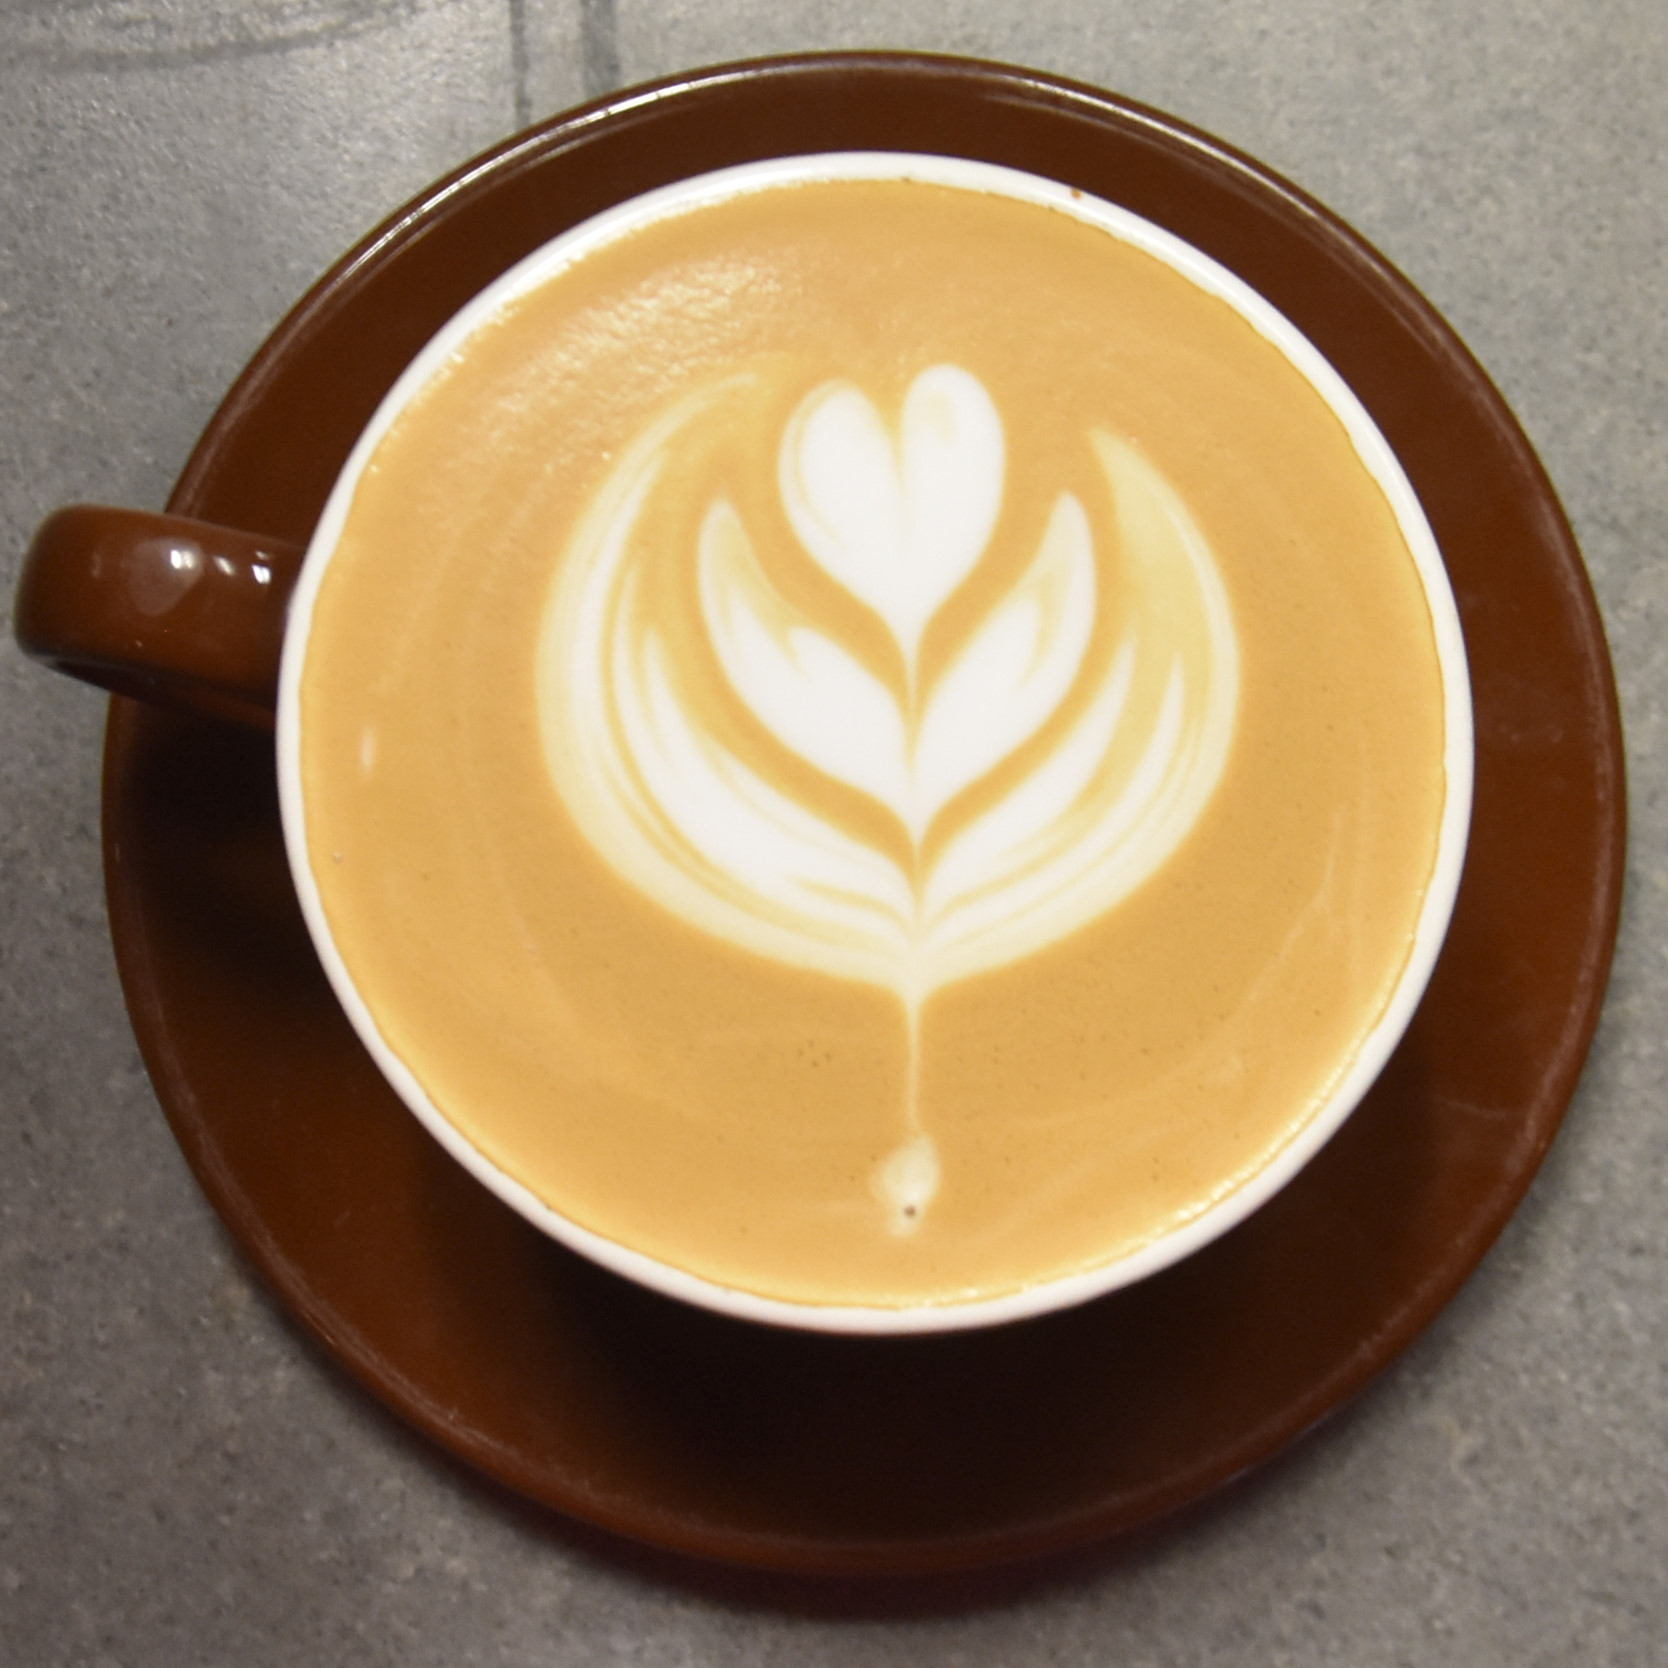 A latte with some tulip latte art, made with the Boxcar blend and served in a classic earthenware cup.